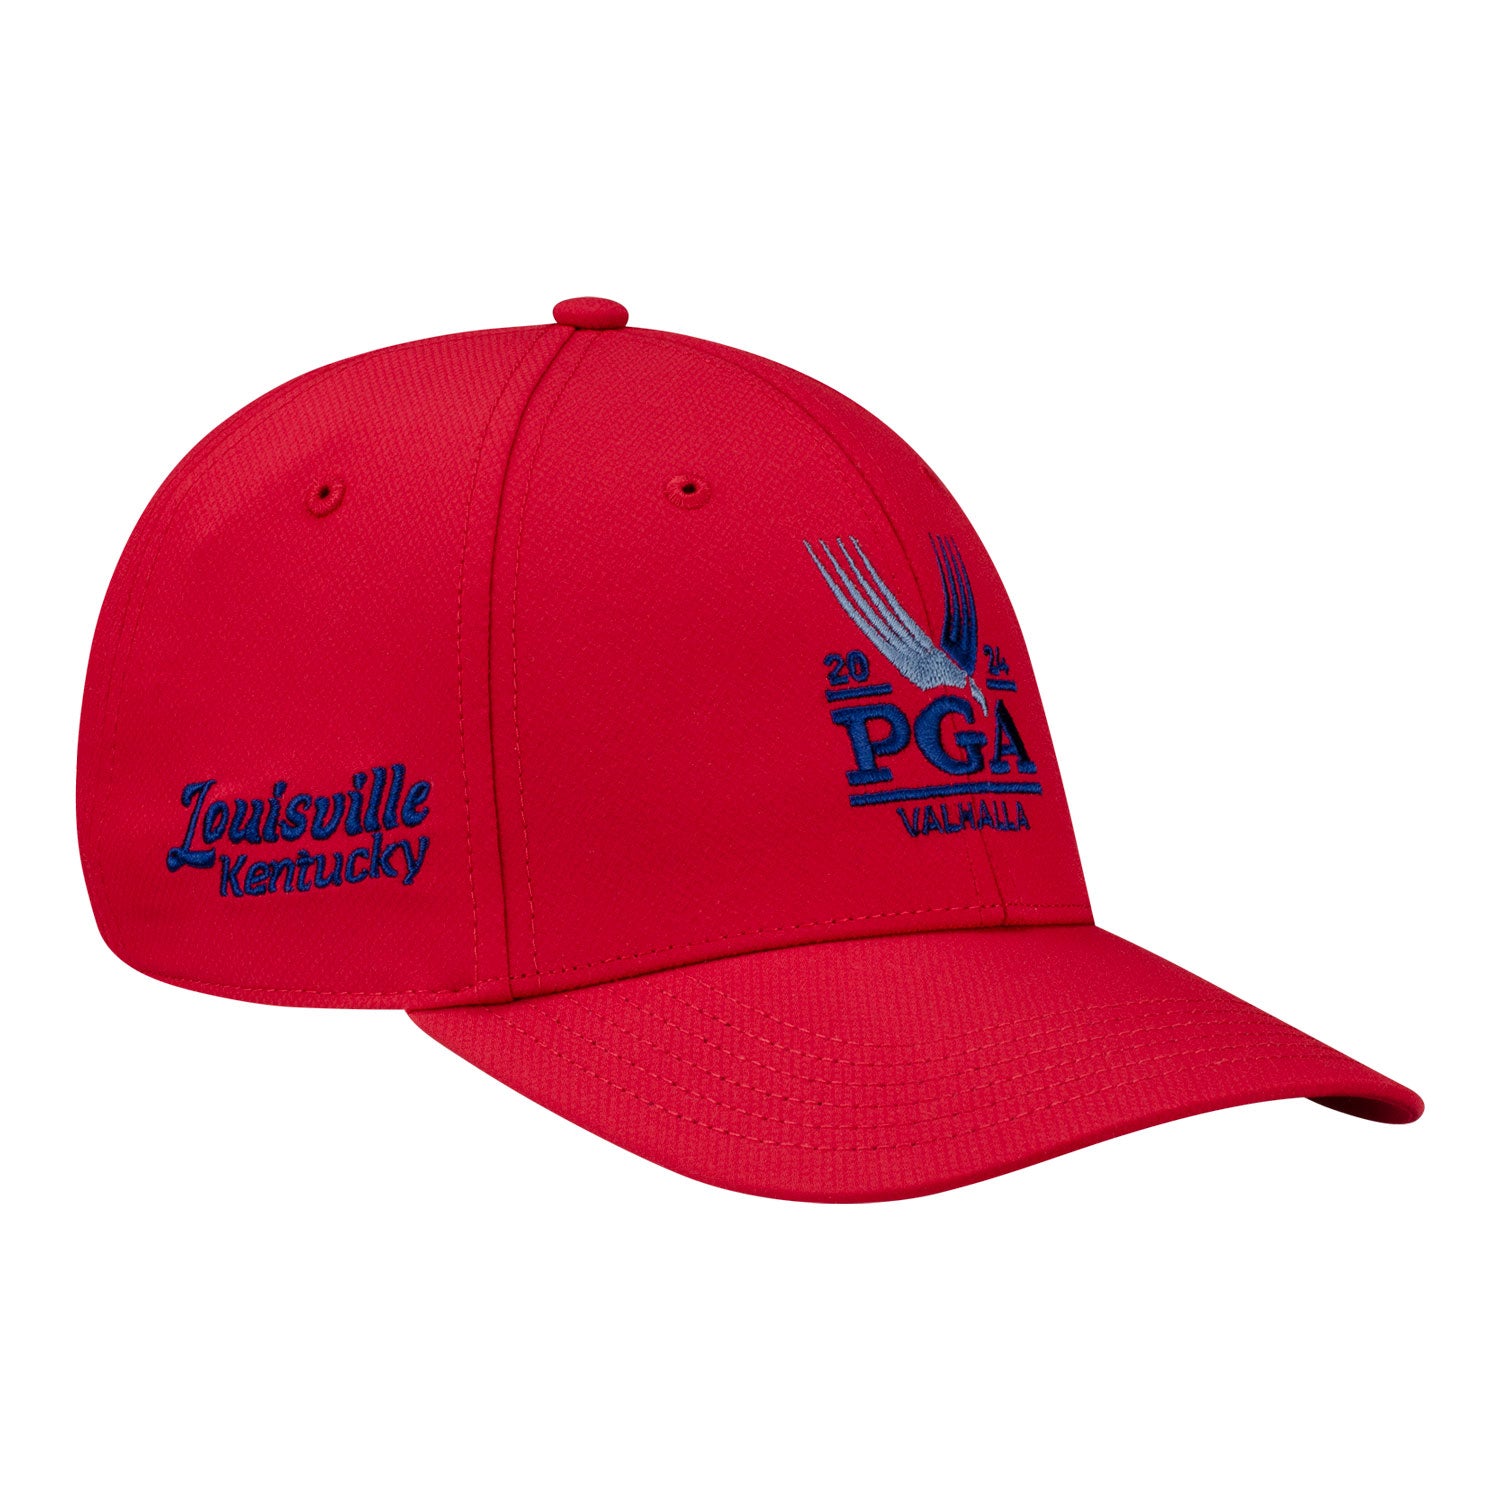 Ahead 2024 PGA Championship Structured Tech Hat in University Red - Angled Front Right View